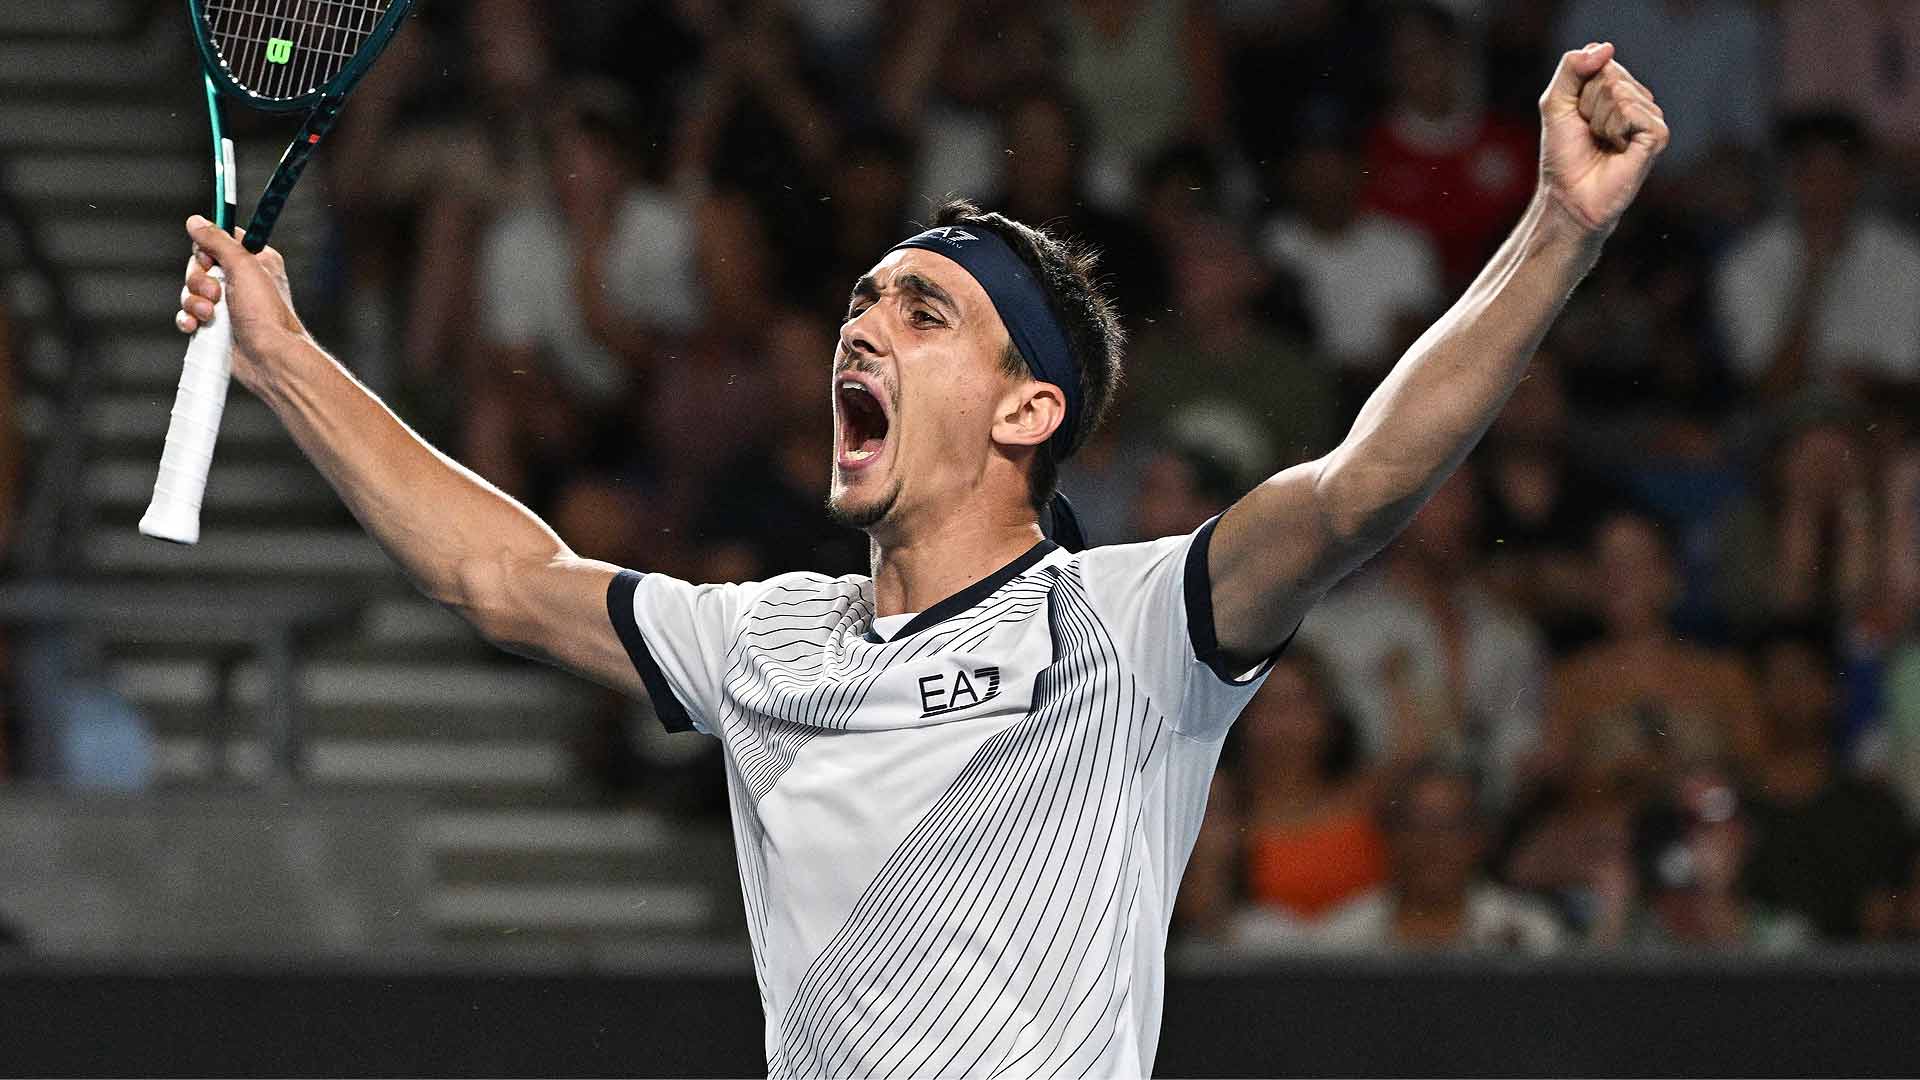 Lorenzo Sonego celebrates his first-round victory at Melbourne Park against Daniel Evans.